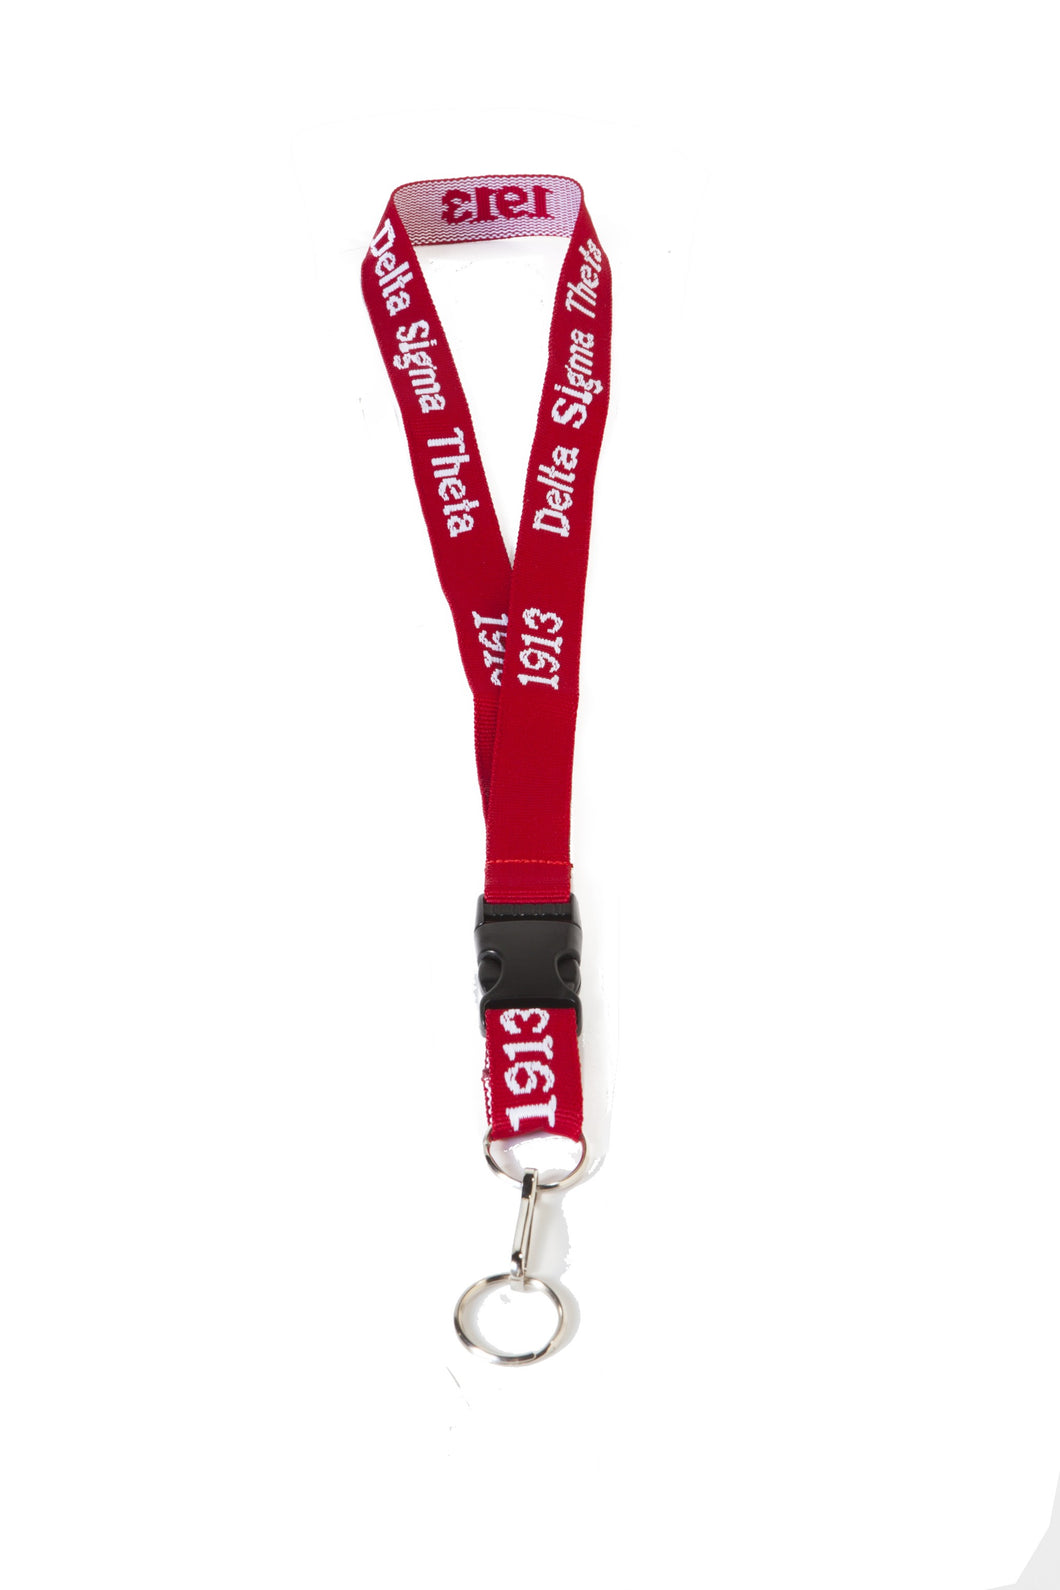 New! DELTA (DST) EMBROIDERED LANYARD